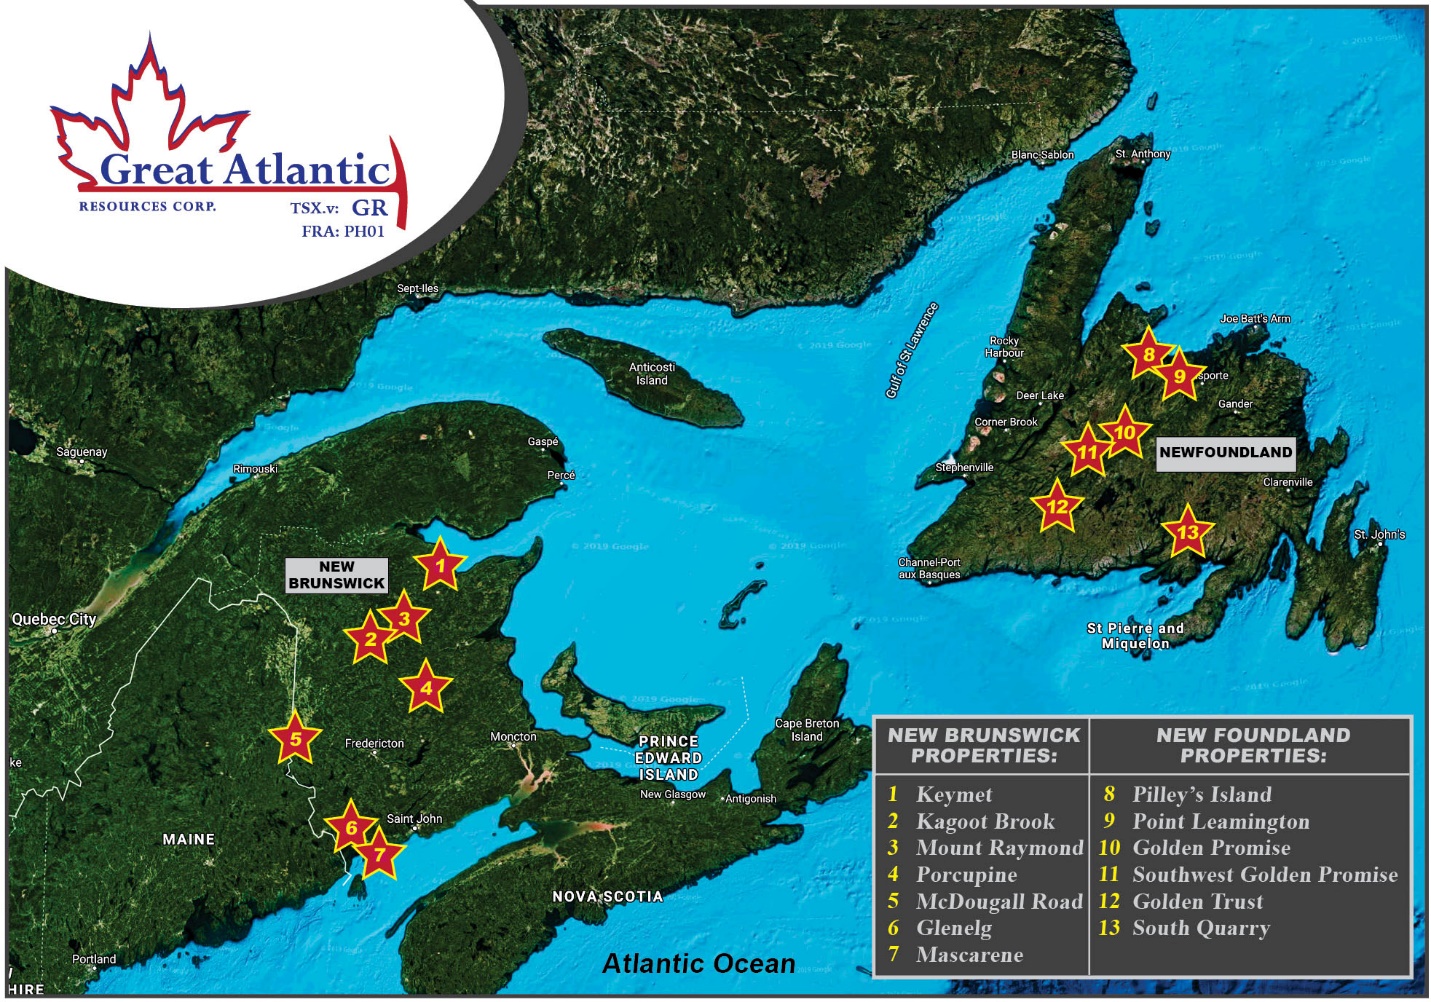 Great Atlantic Resources Corp., Thursday, May 14, 2020, Press release picture